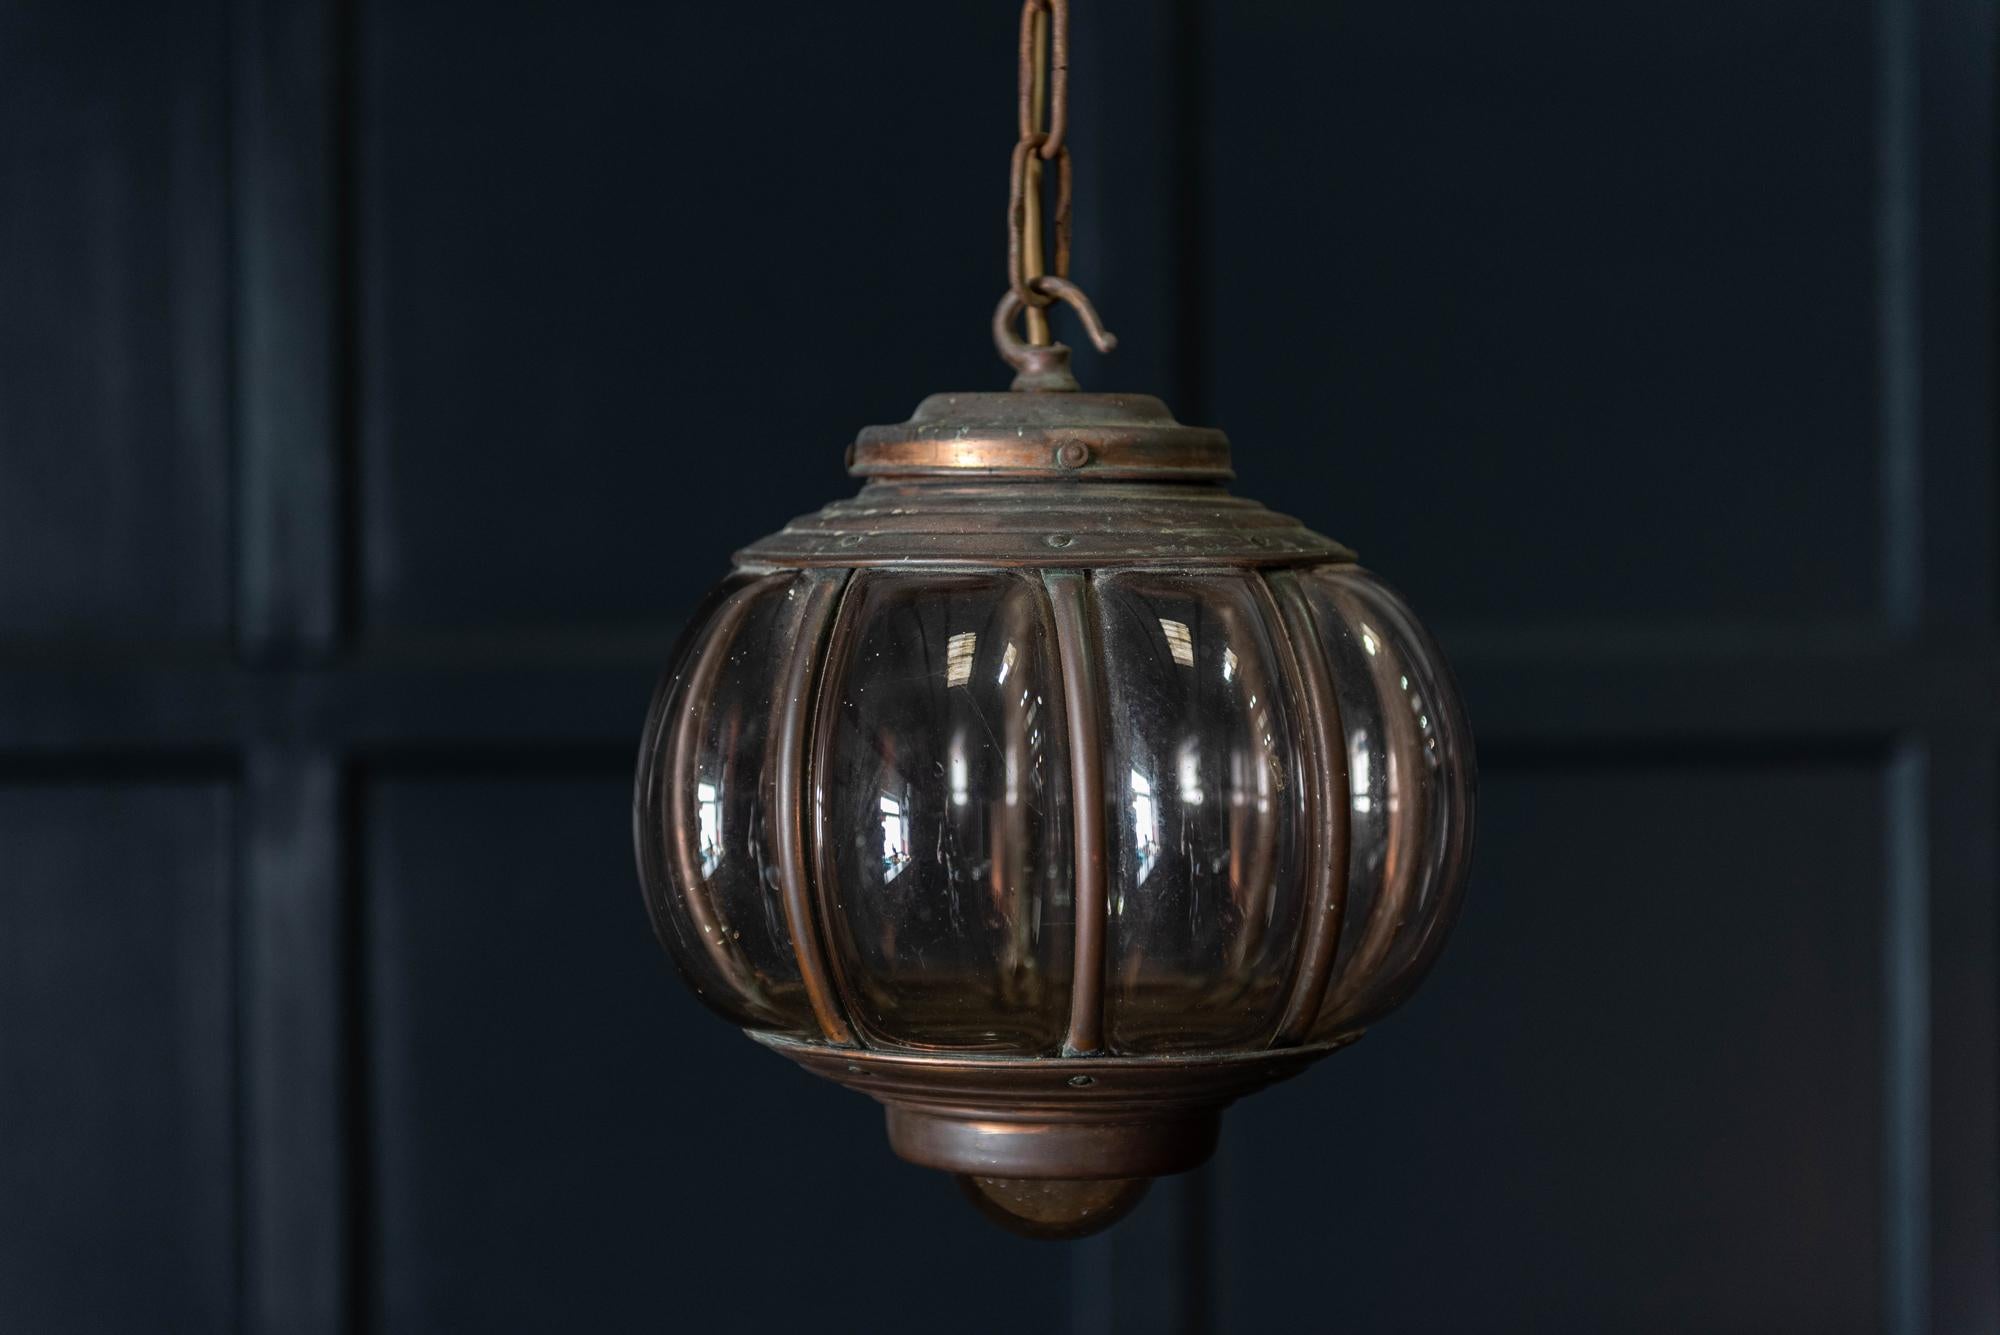 English Arts & Crafts copper glass hall pendant,
circa 1910.
Hall pendant with original glass chain and ceiling hook.

Measures: Diameter 25cm
Chain 50cm.

 